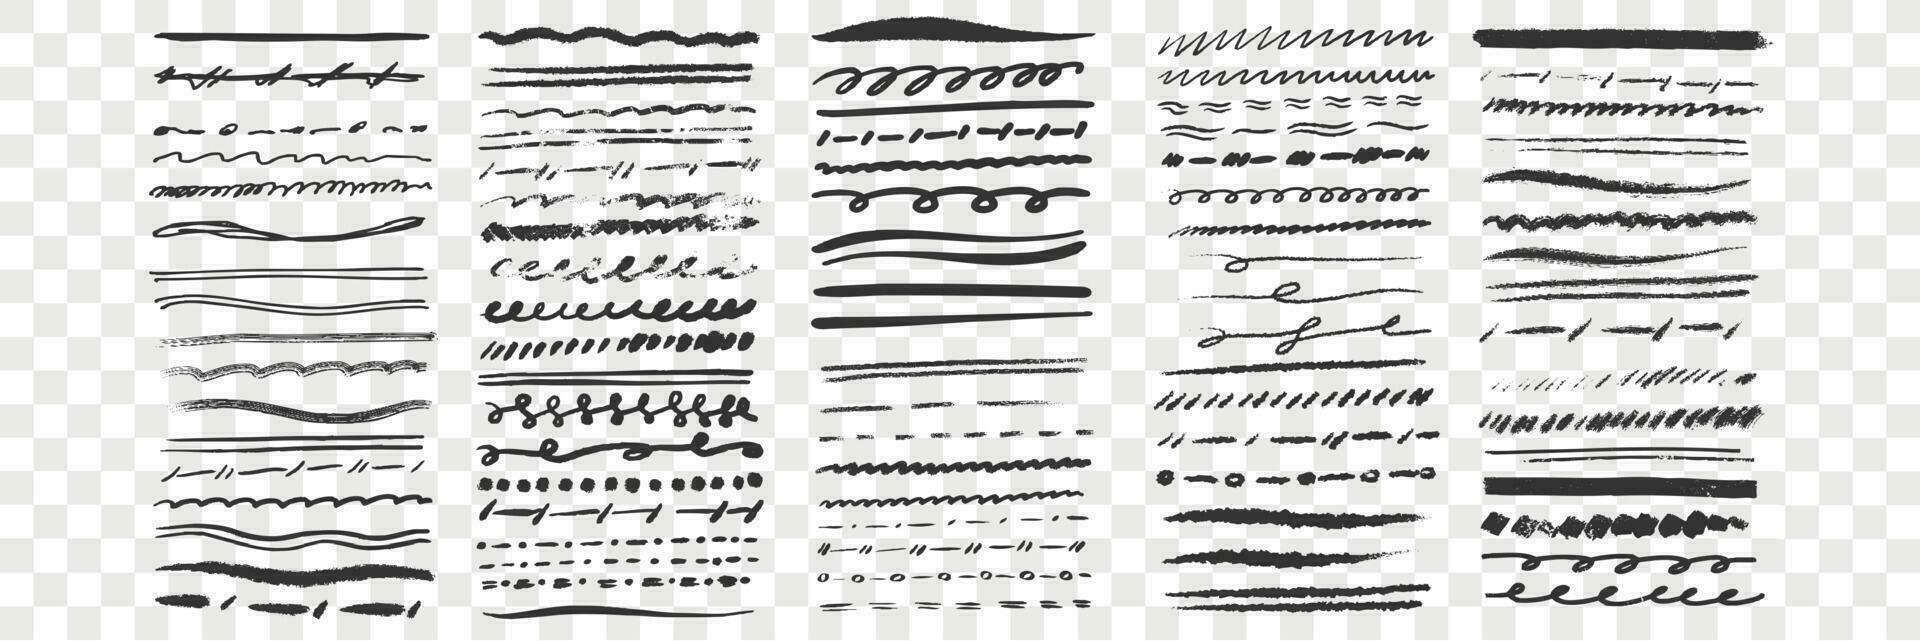 Hand drawn lines set. Collection of doodle underlines or pen underlines pencil hand drawn strokes on transparent. Handmade scribble marker borders illustration vector